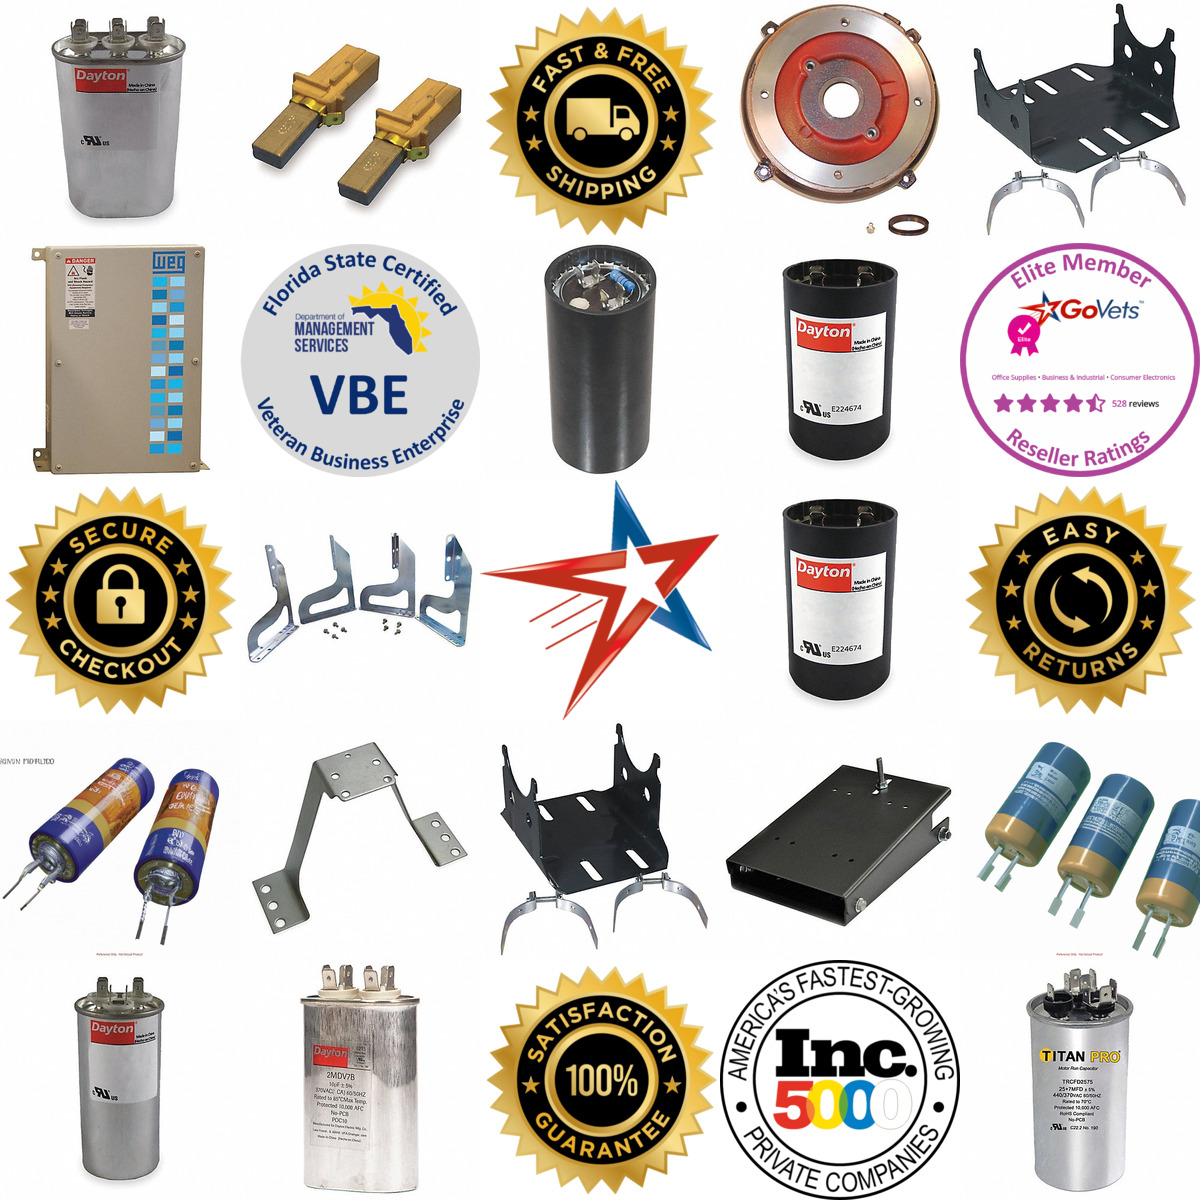 A selection of Motor Supplies products on GoVets